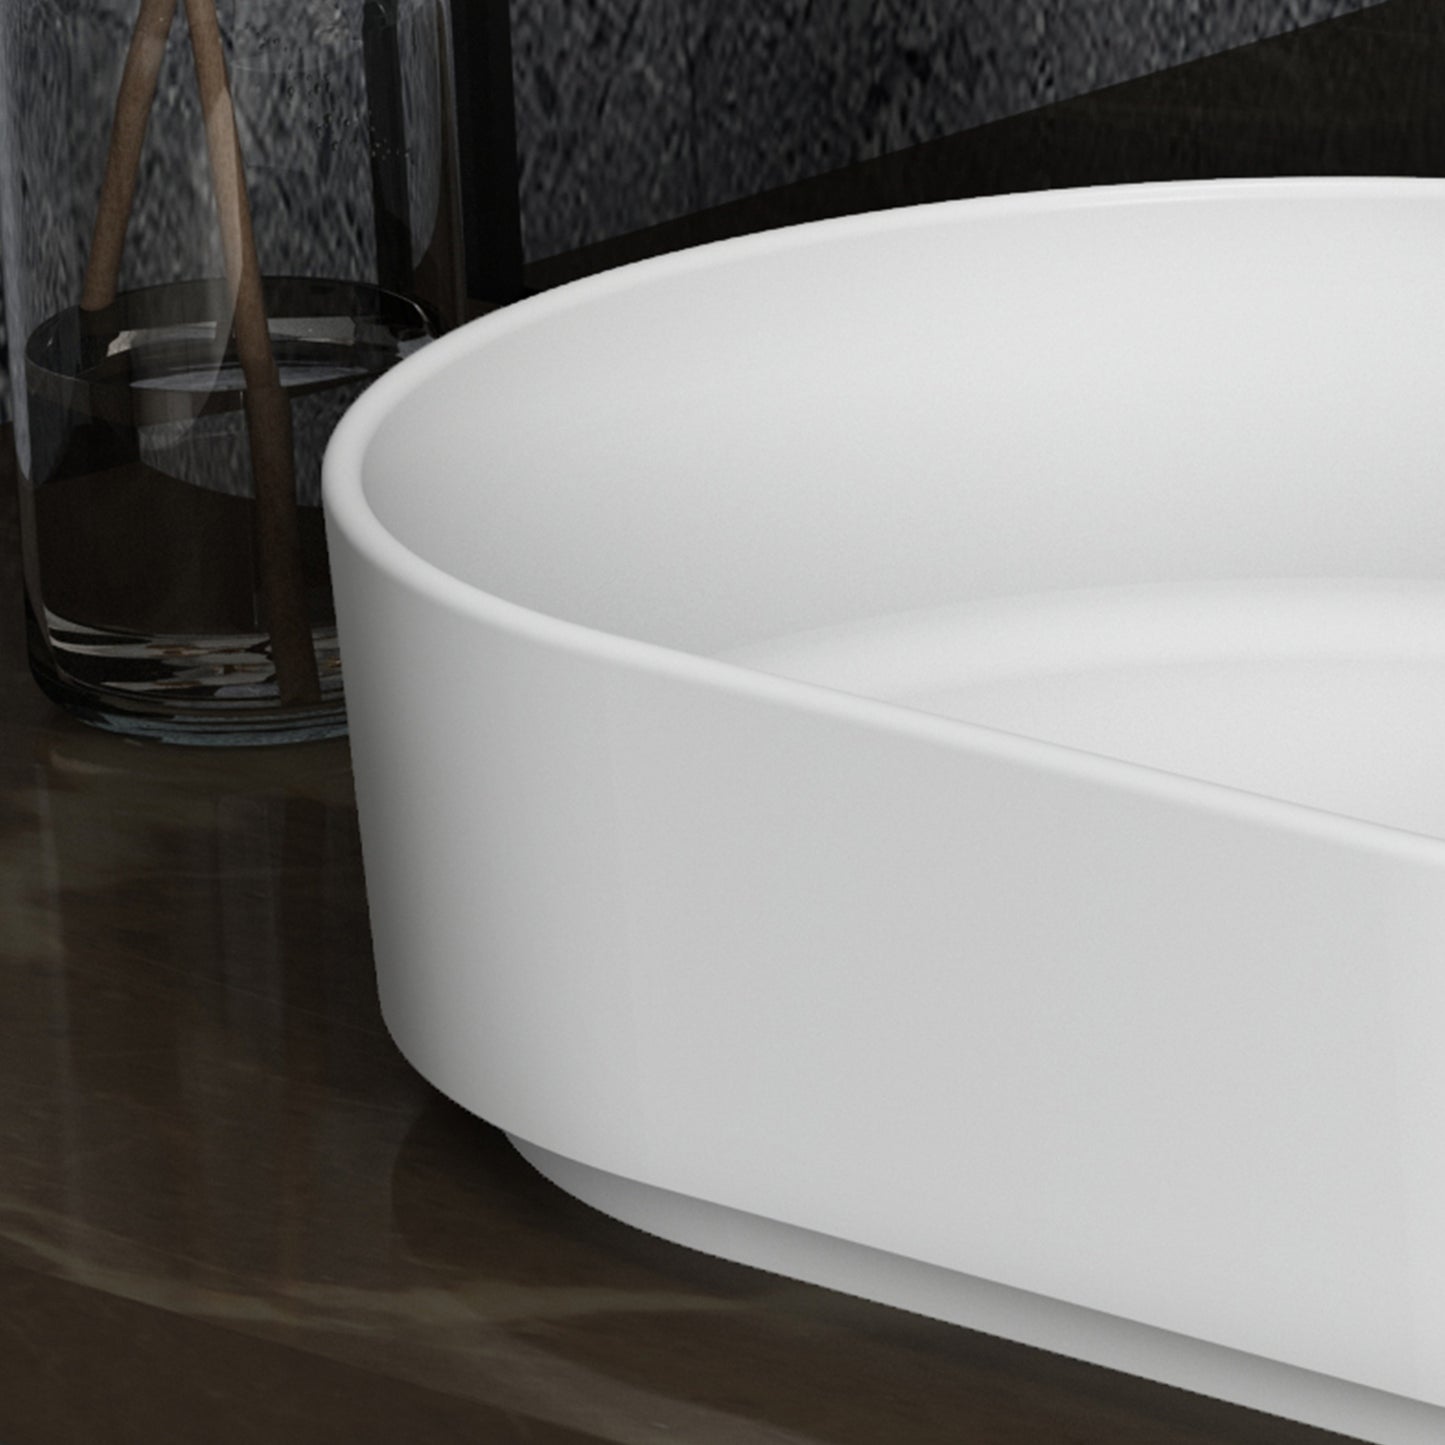 FS141-580 Solid surface basin